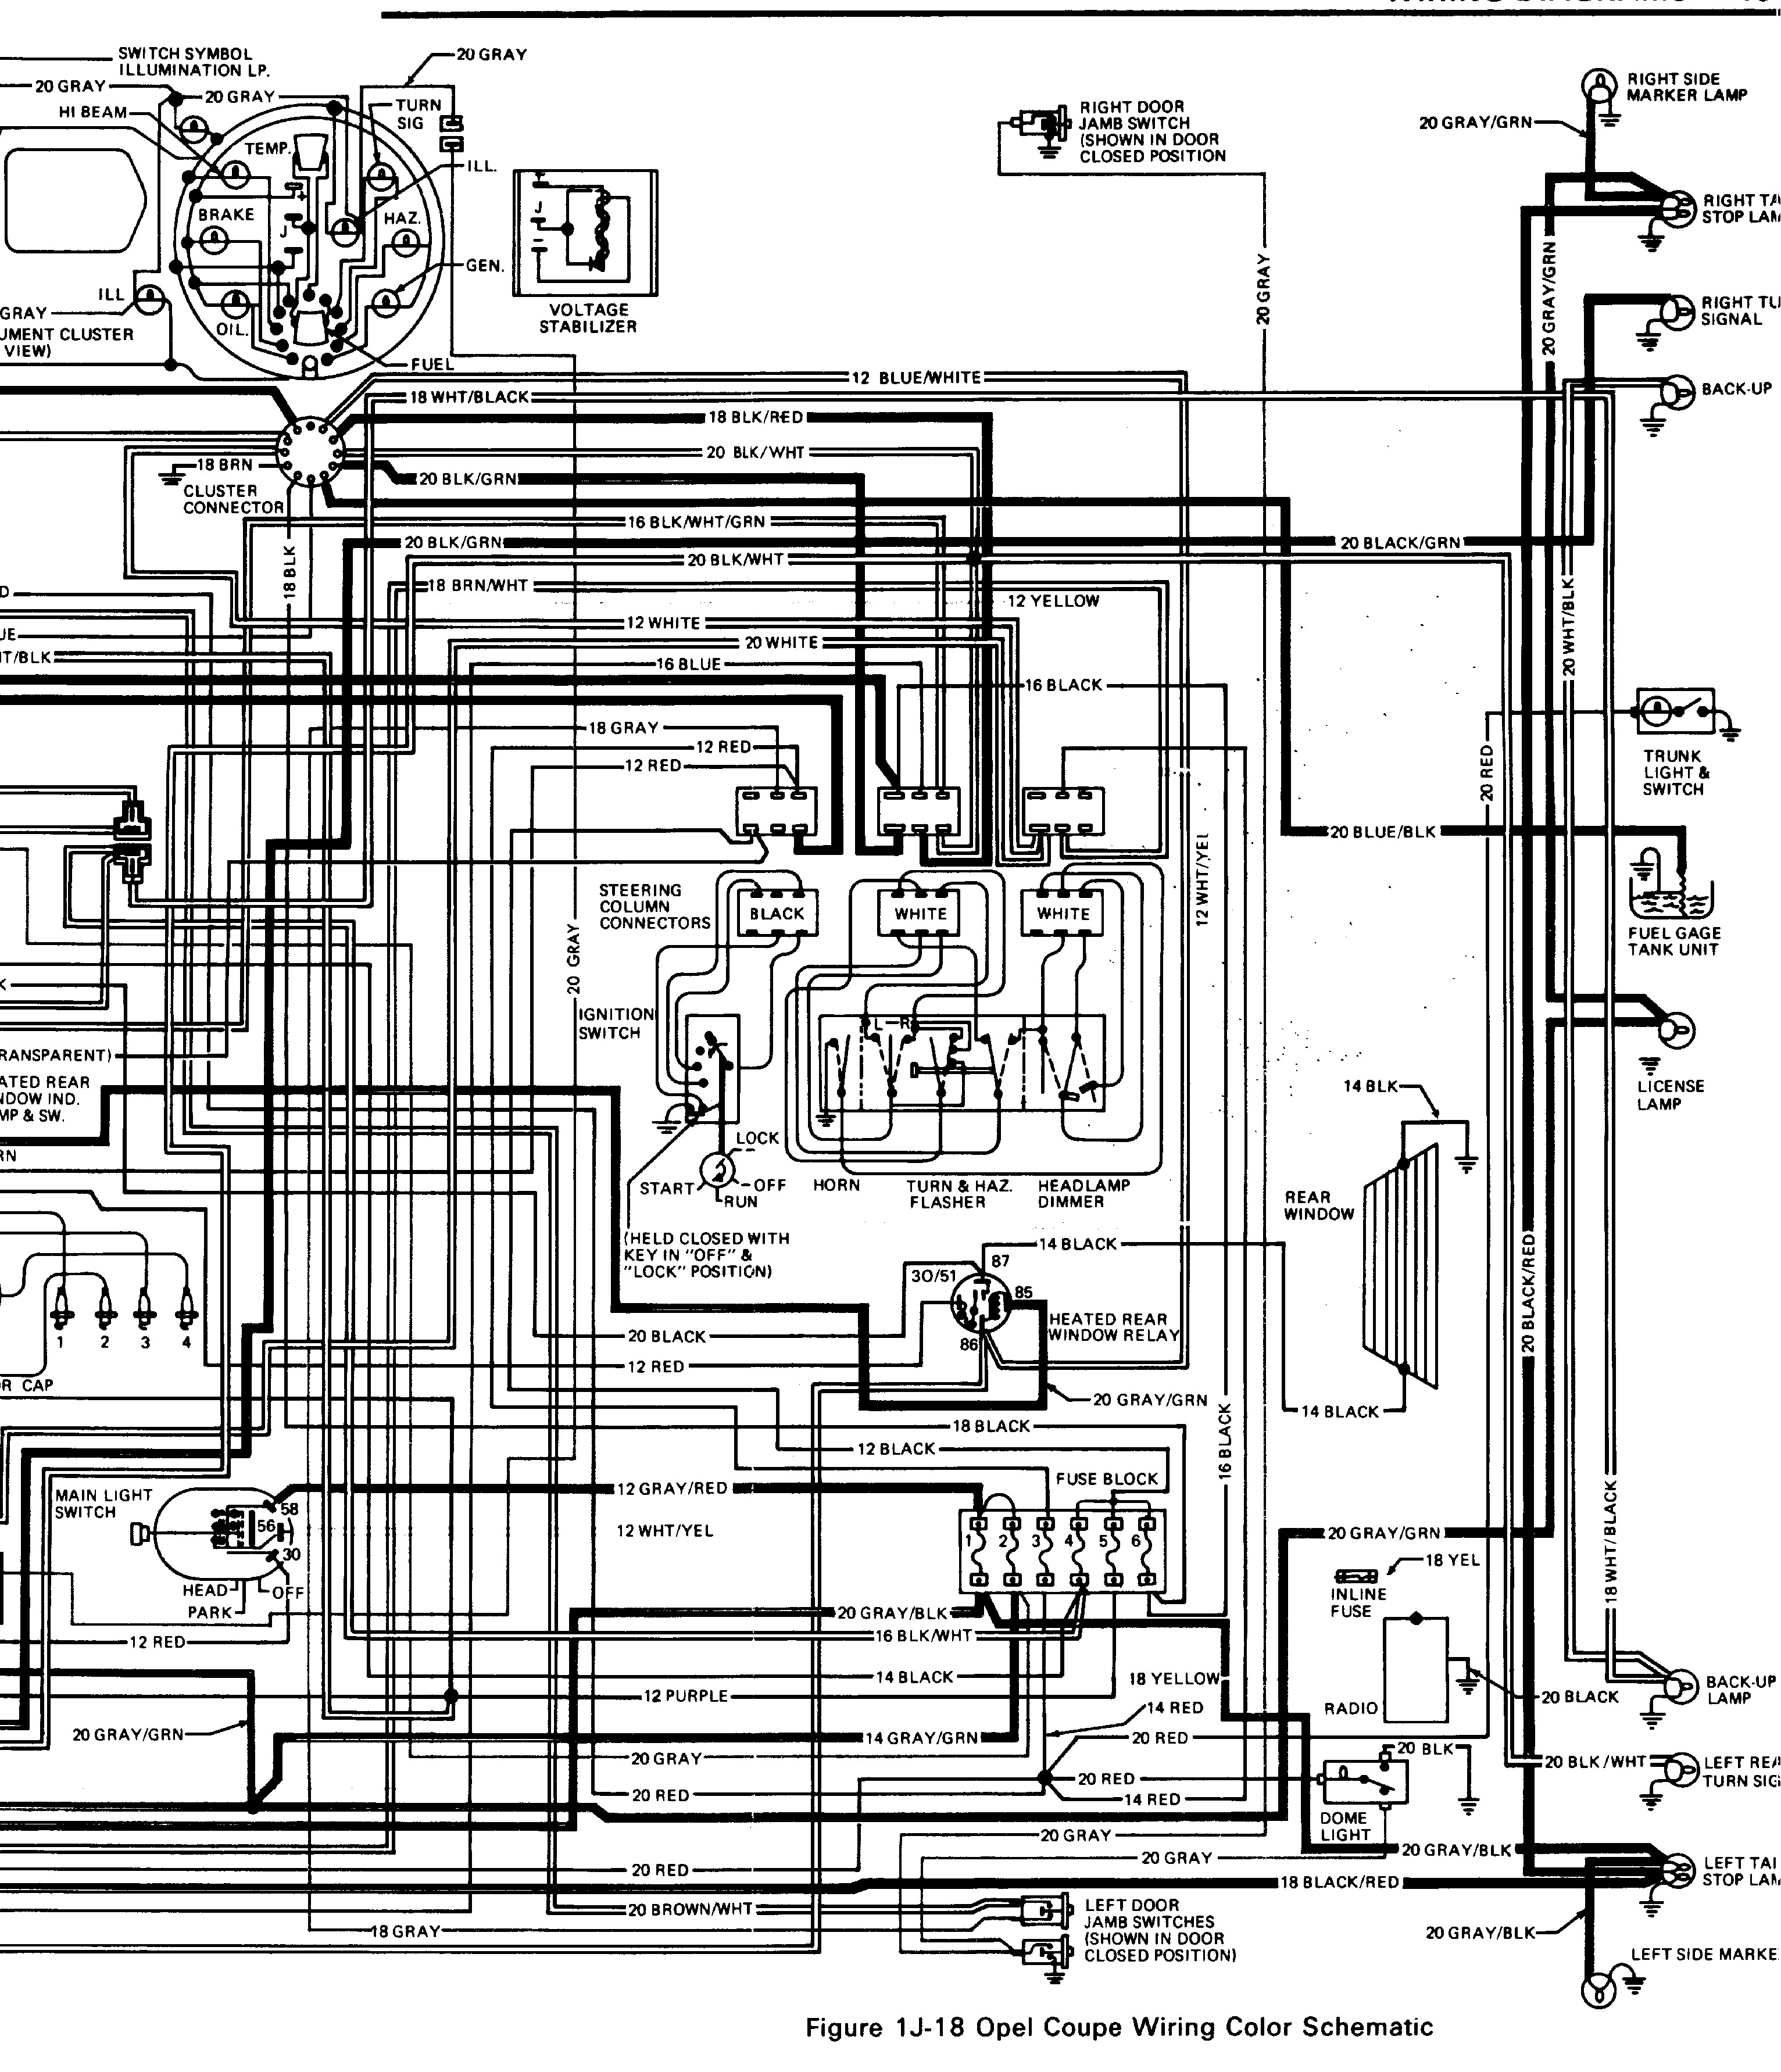 Vauxhall Vectra Engine Diagram Amazing Vauxhall astra Wiring Diagram Gallery Everything You Need Of Vauxhall Vectra Engine Diagram